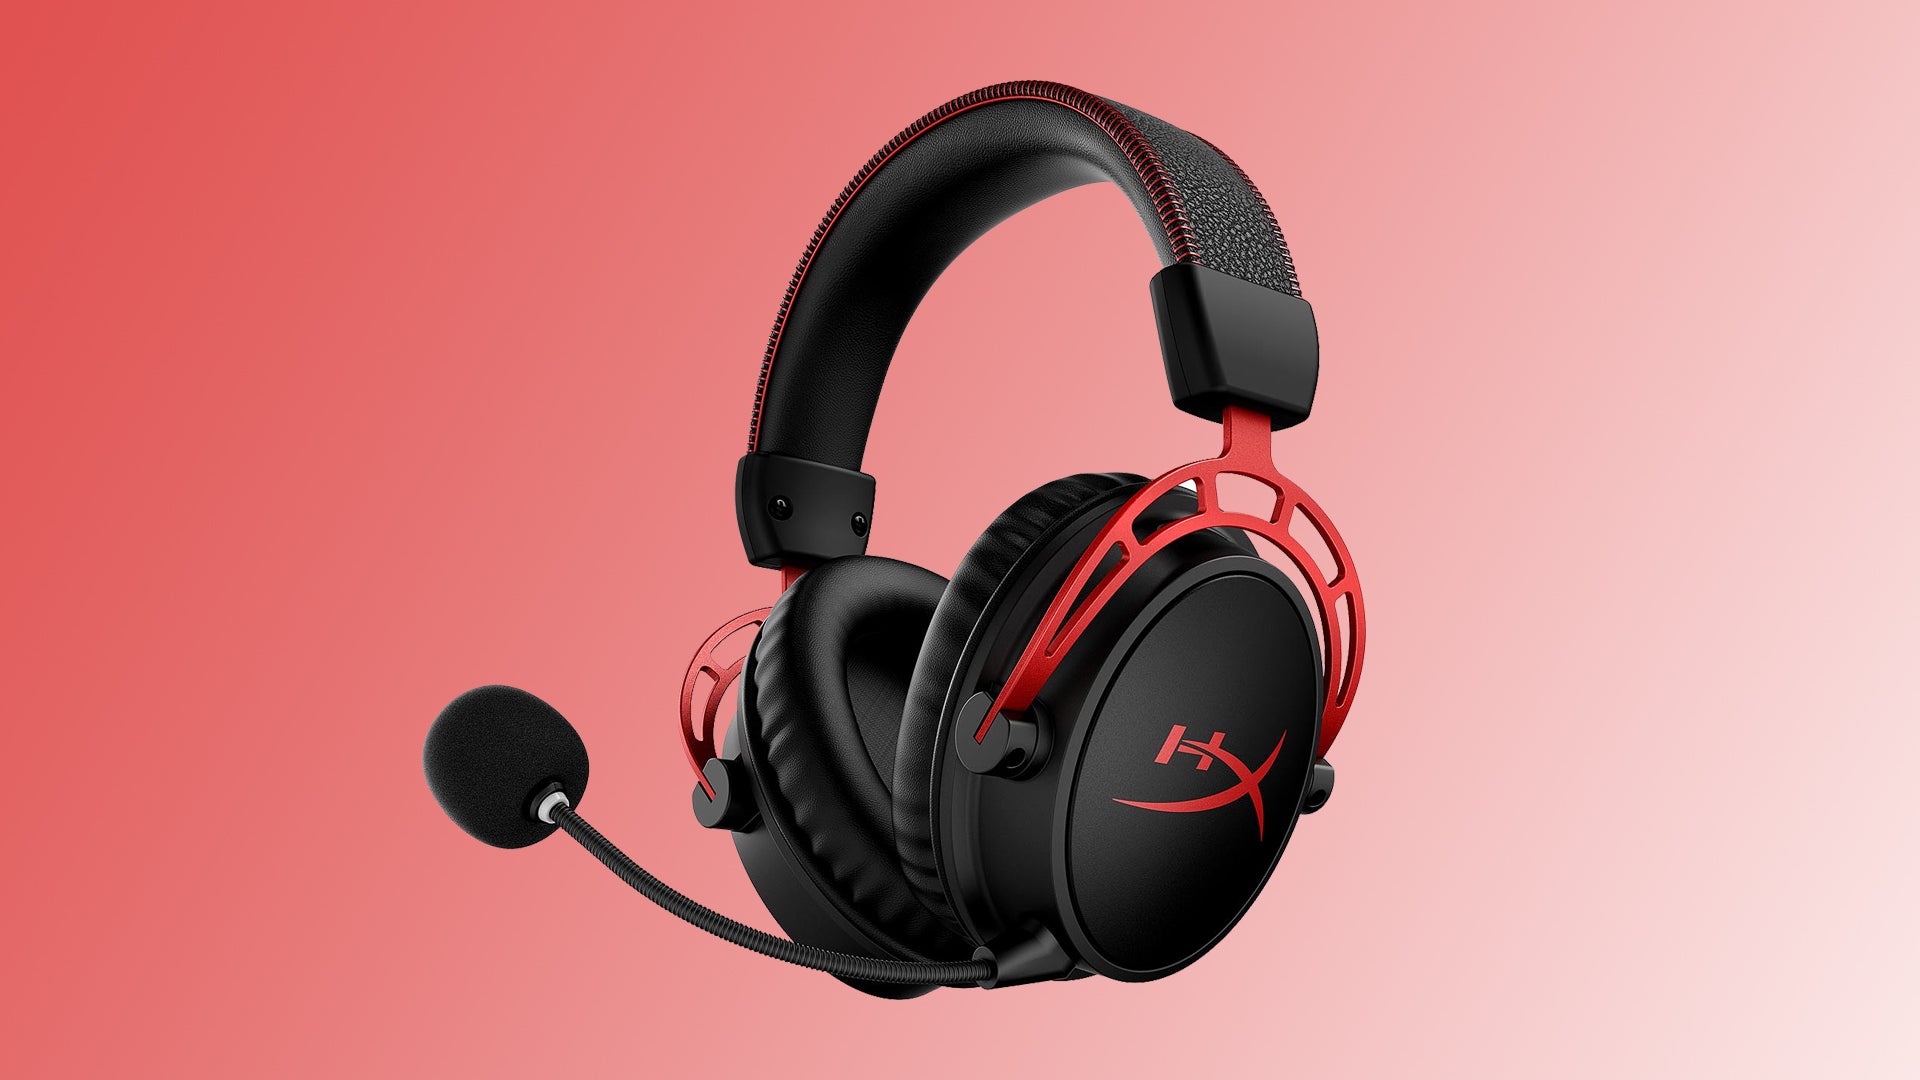 Image of a HyperX Cloud Alpha Wireless gaming headset on a red to white gradient background.